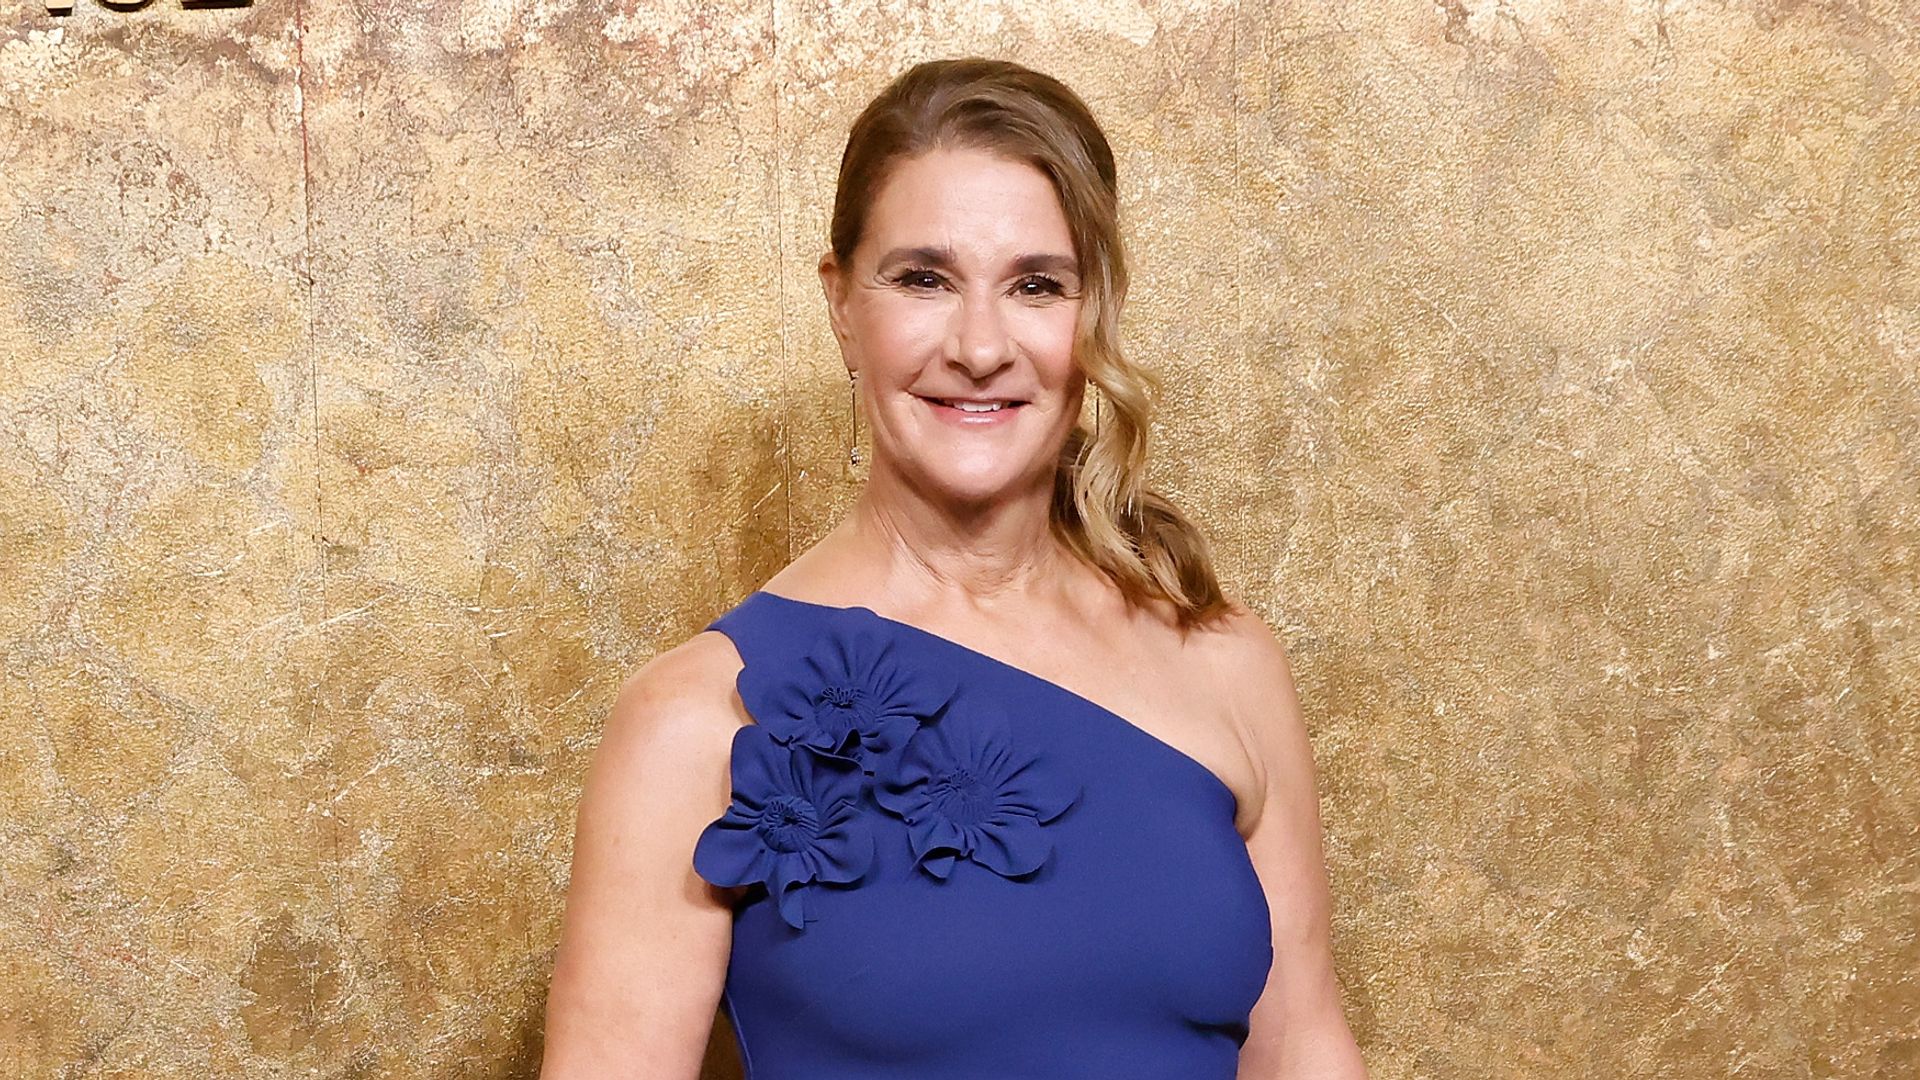 Melinda French Gates addresses engagement after stepping out with huge diamond ring following Bill Gates split